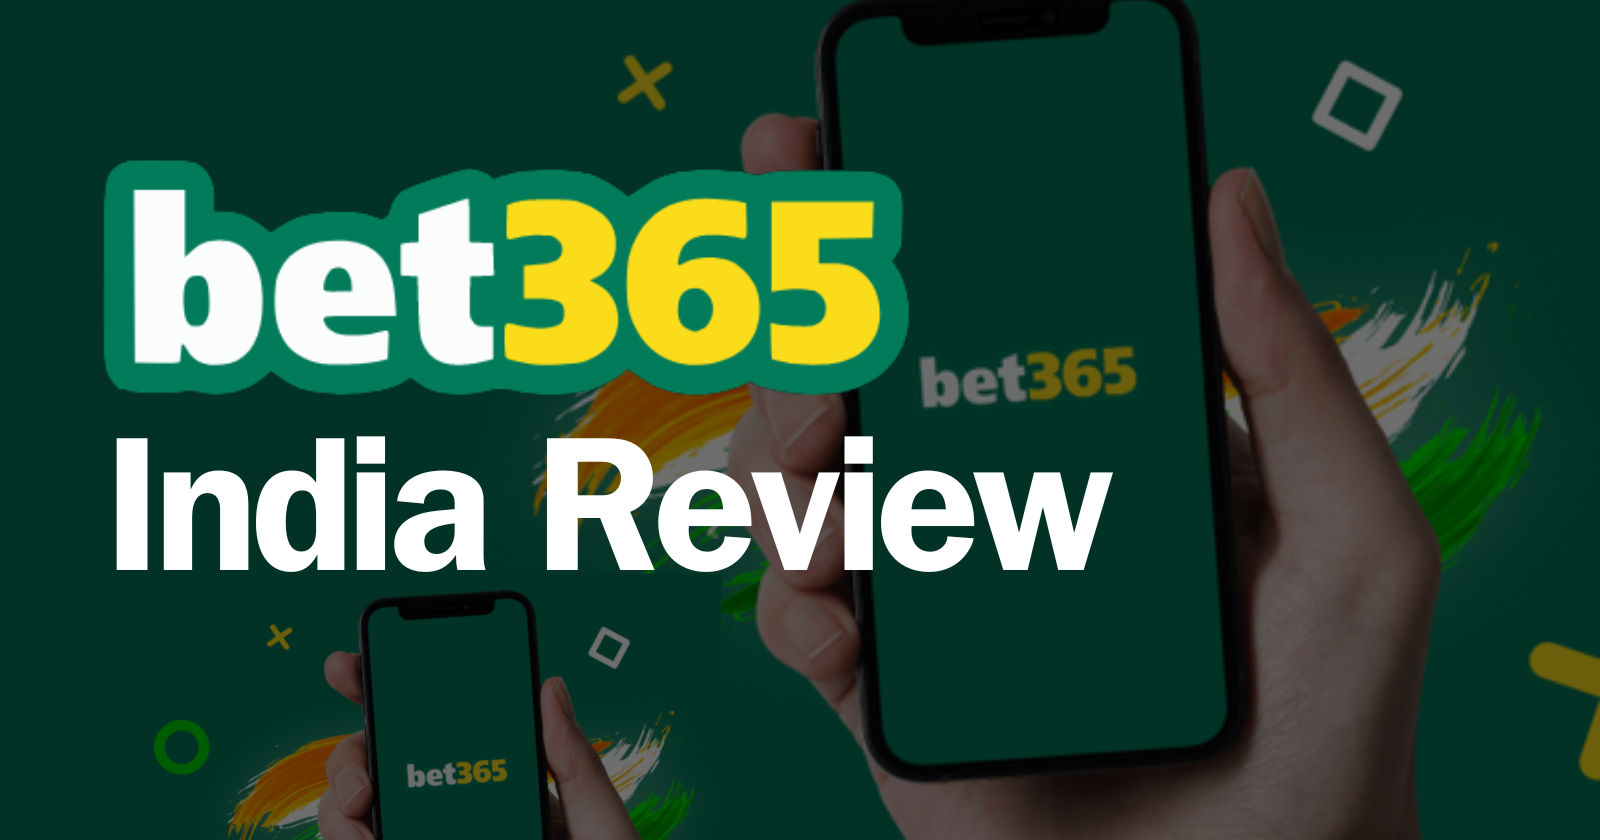 Bet365 India Review: Is Bet365 Legal & Safe?